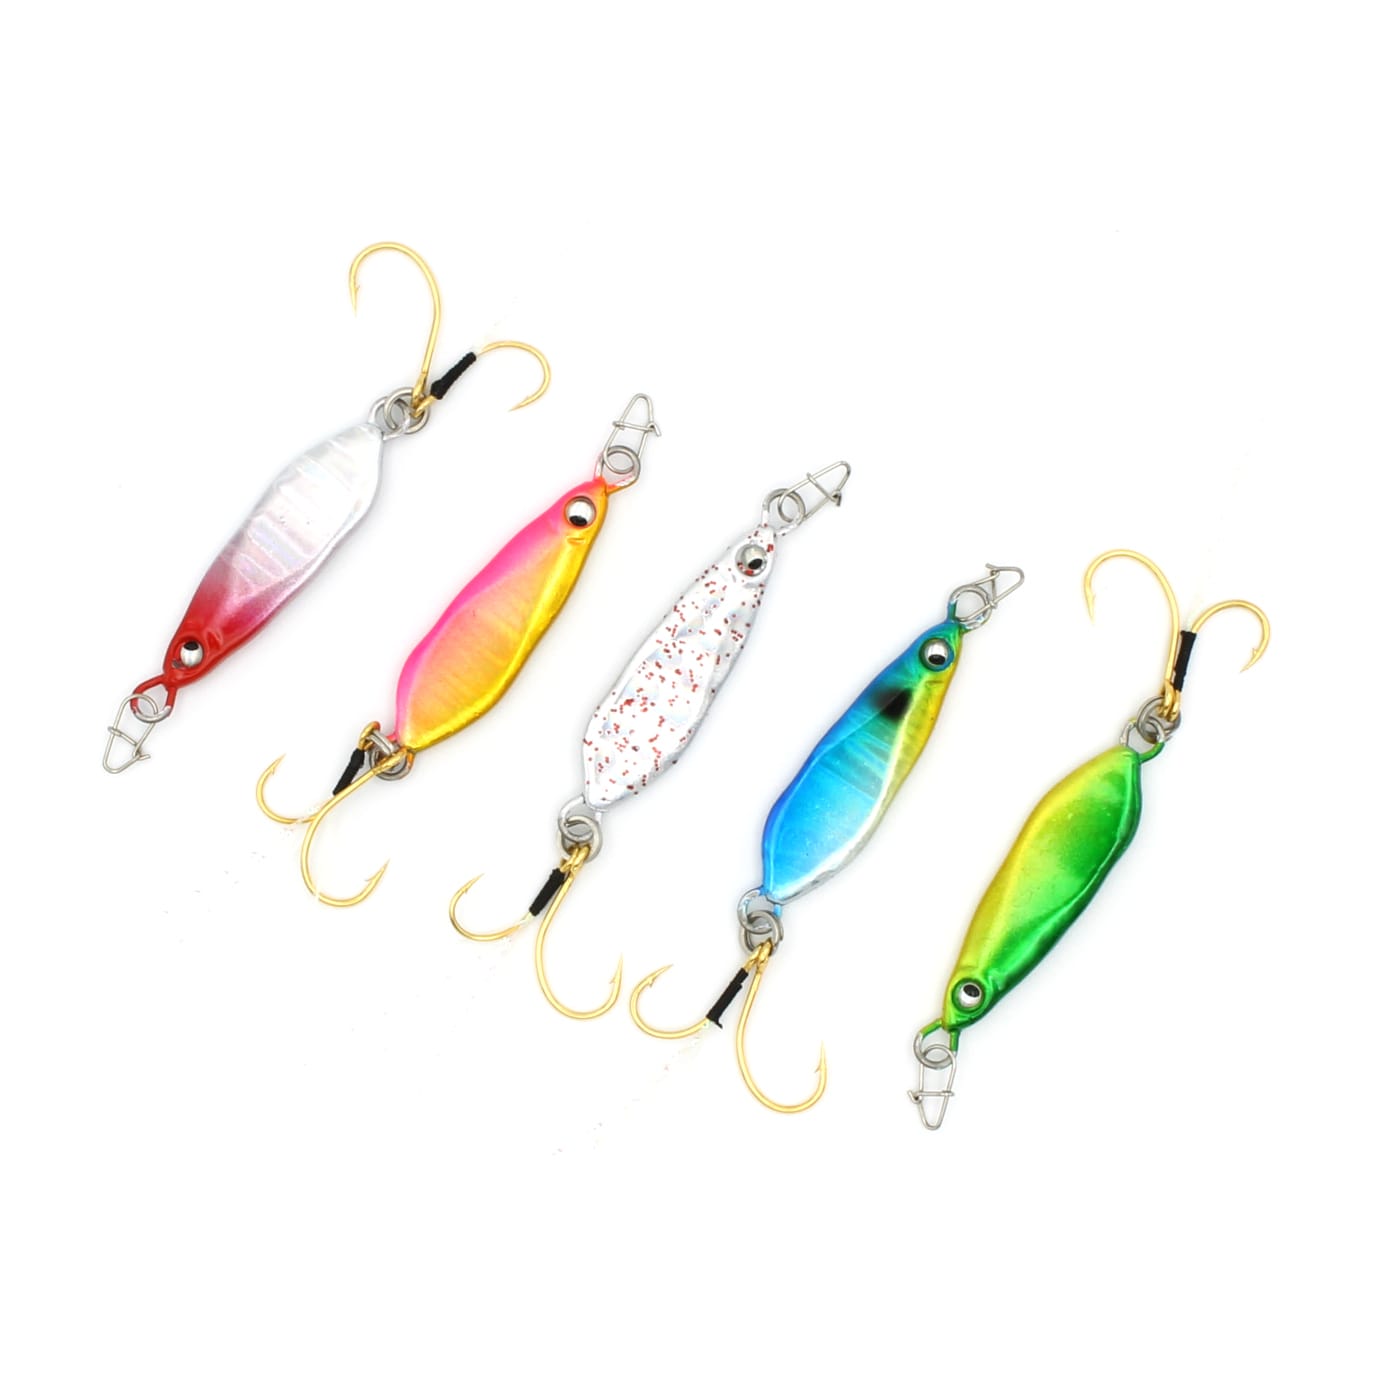 iFishband Thousand Jig - Micro Jigging/Casting Spoon - Bait Finesse Empire